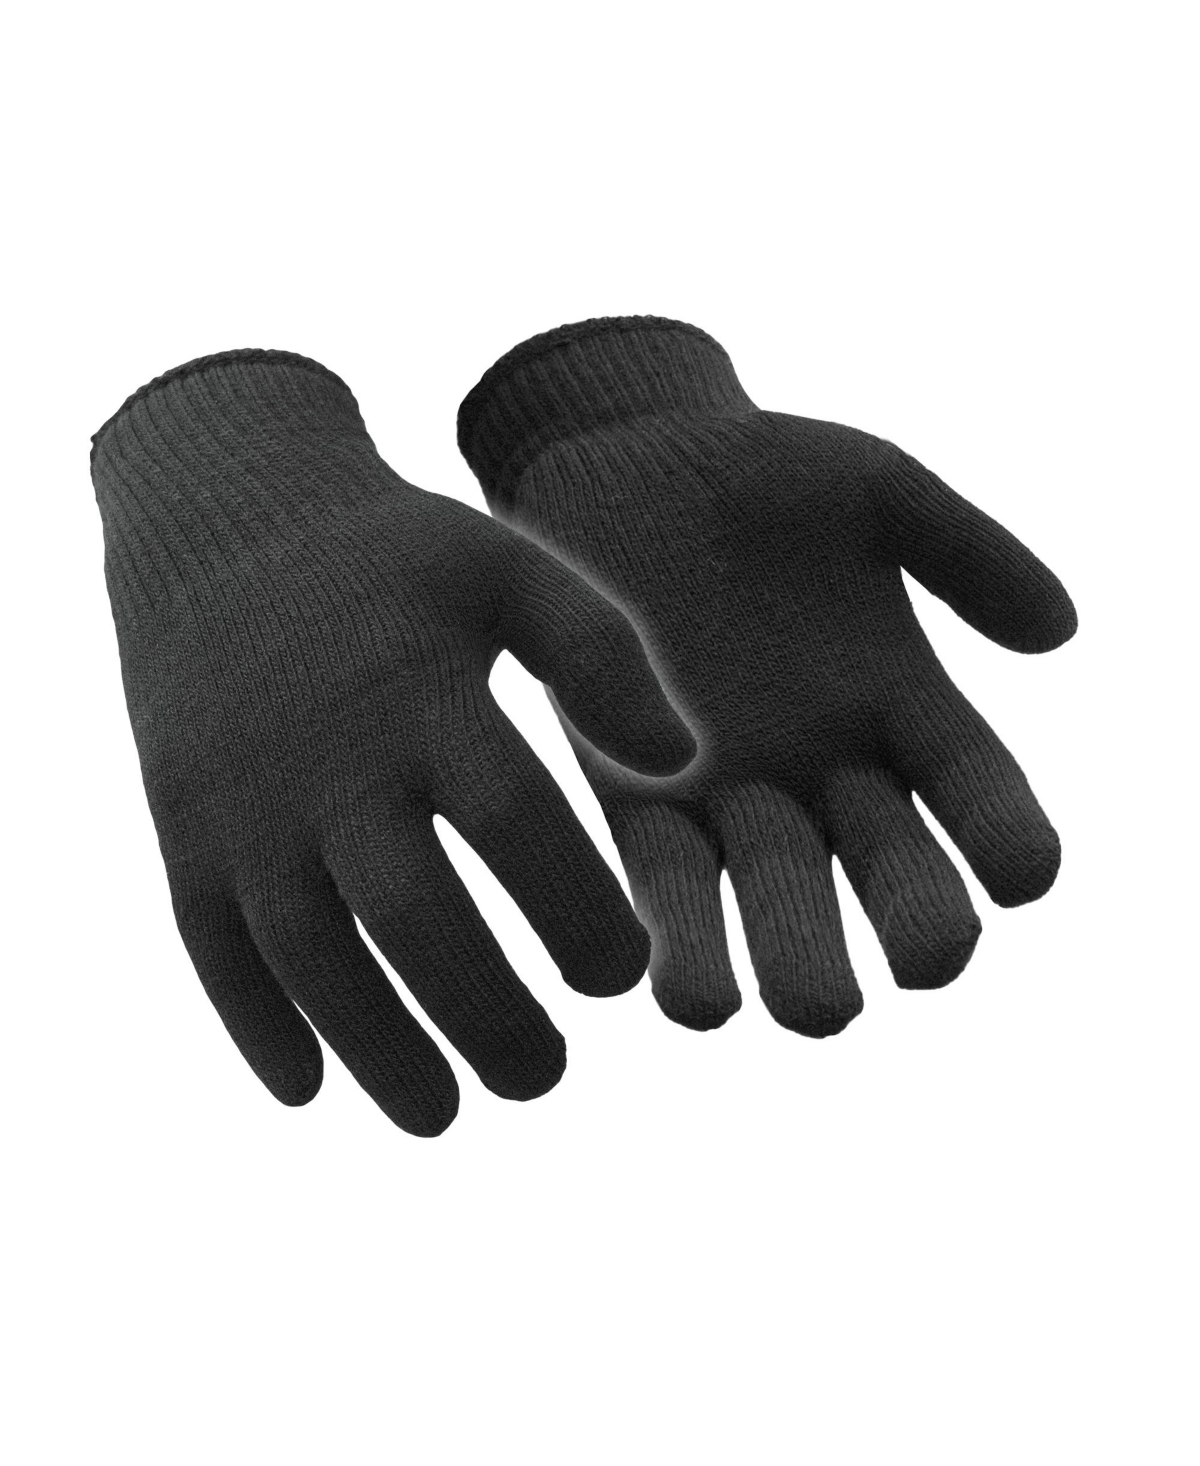 Men's Moisture Wicking Stretch Fit Glove Liners (Pack of 12 Pairs) - Black